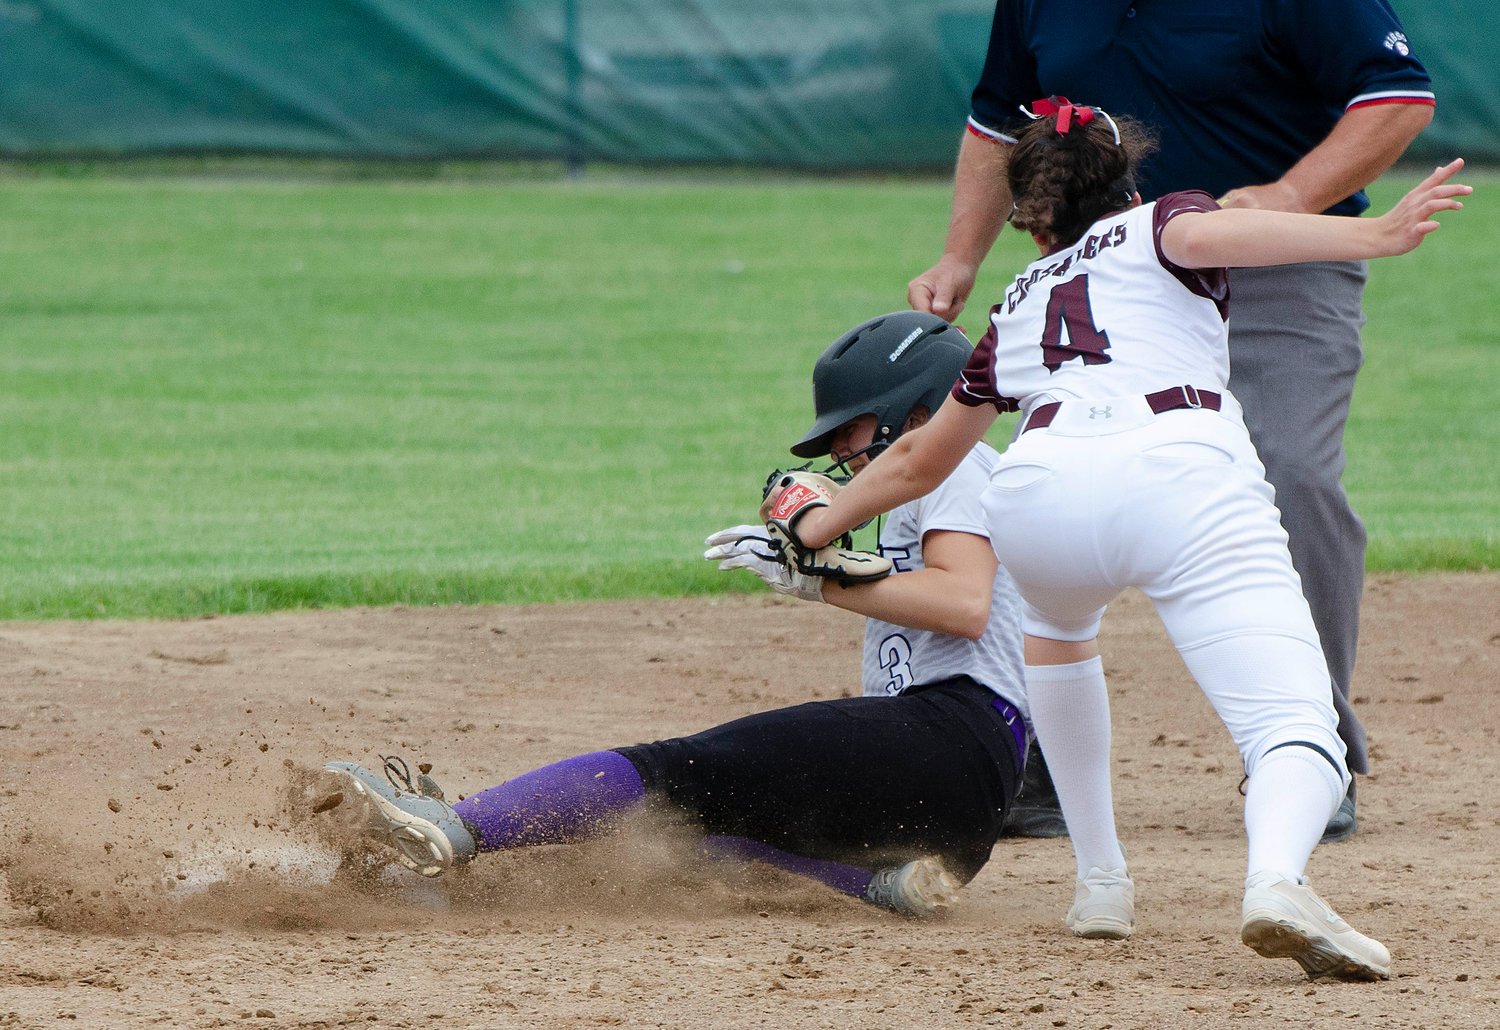 Alice Grantham steals second base in the top of the sixth inning to give the Huskies a runner on second base with two outs.